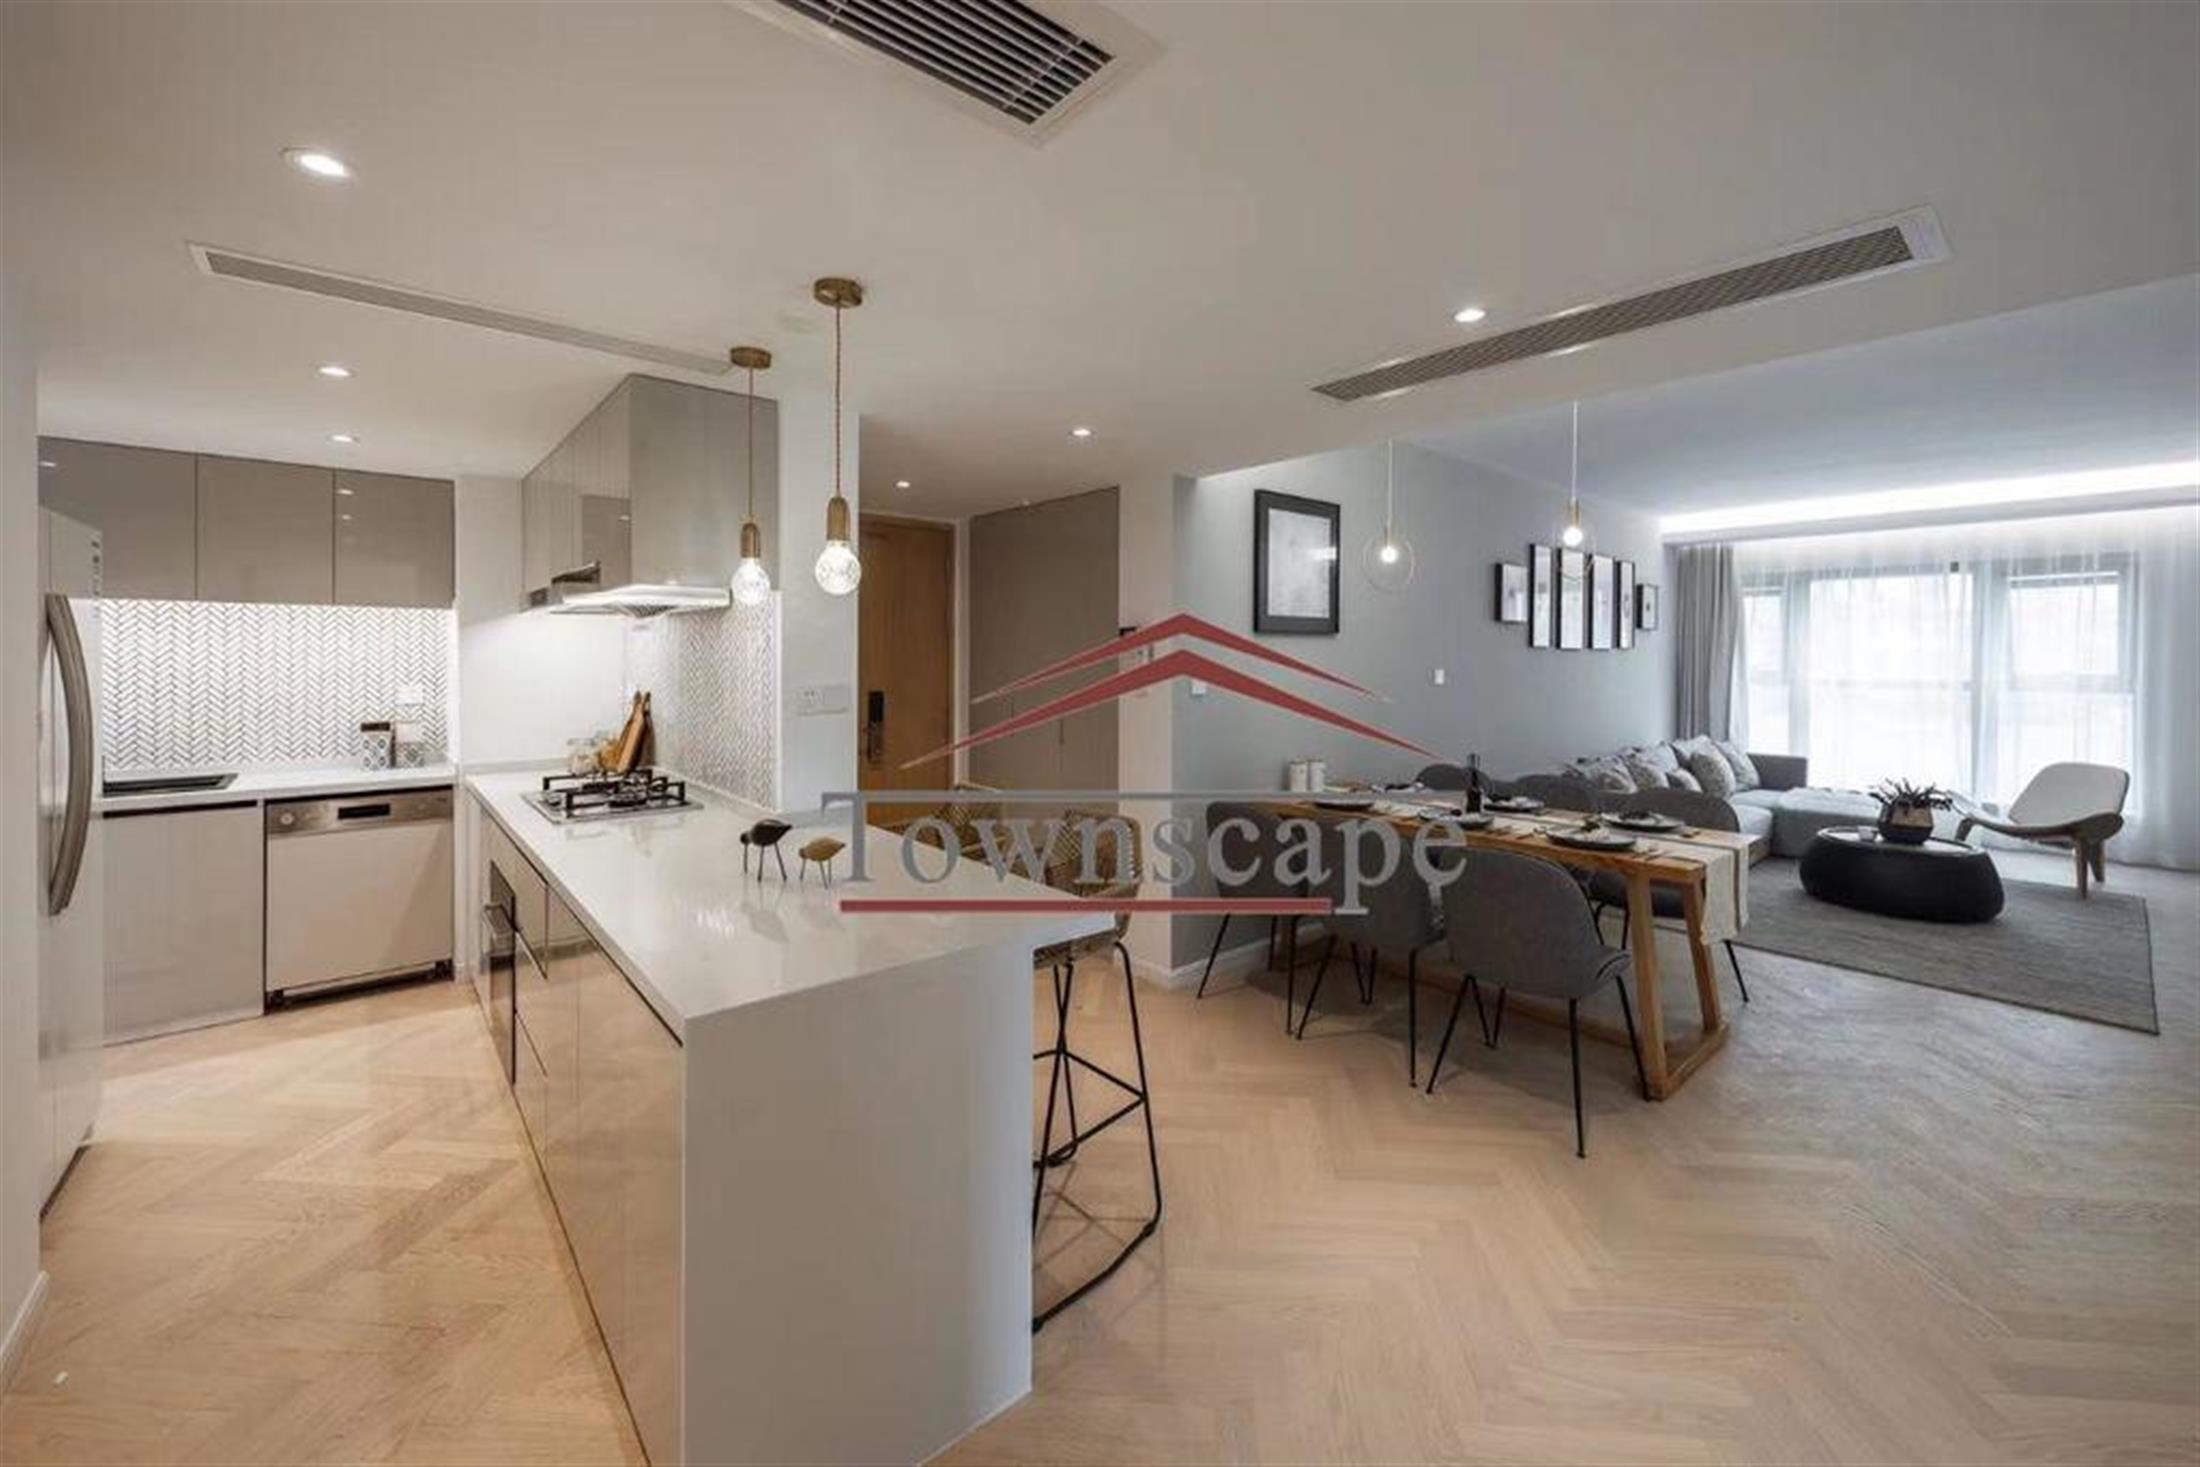 large open kitchen New Gorgeous Spacious Bright Apartment for Rent in Quiet FFC Shanghai